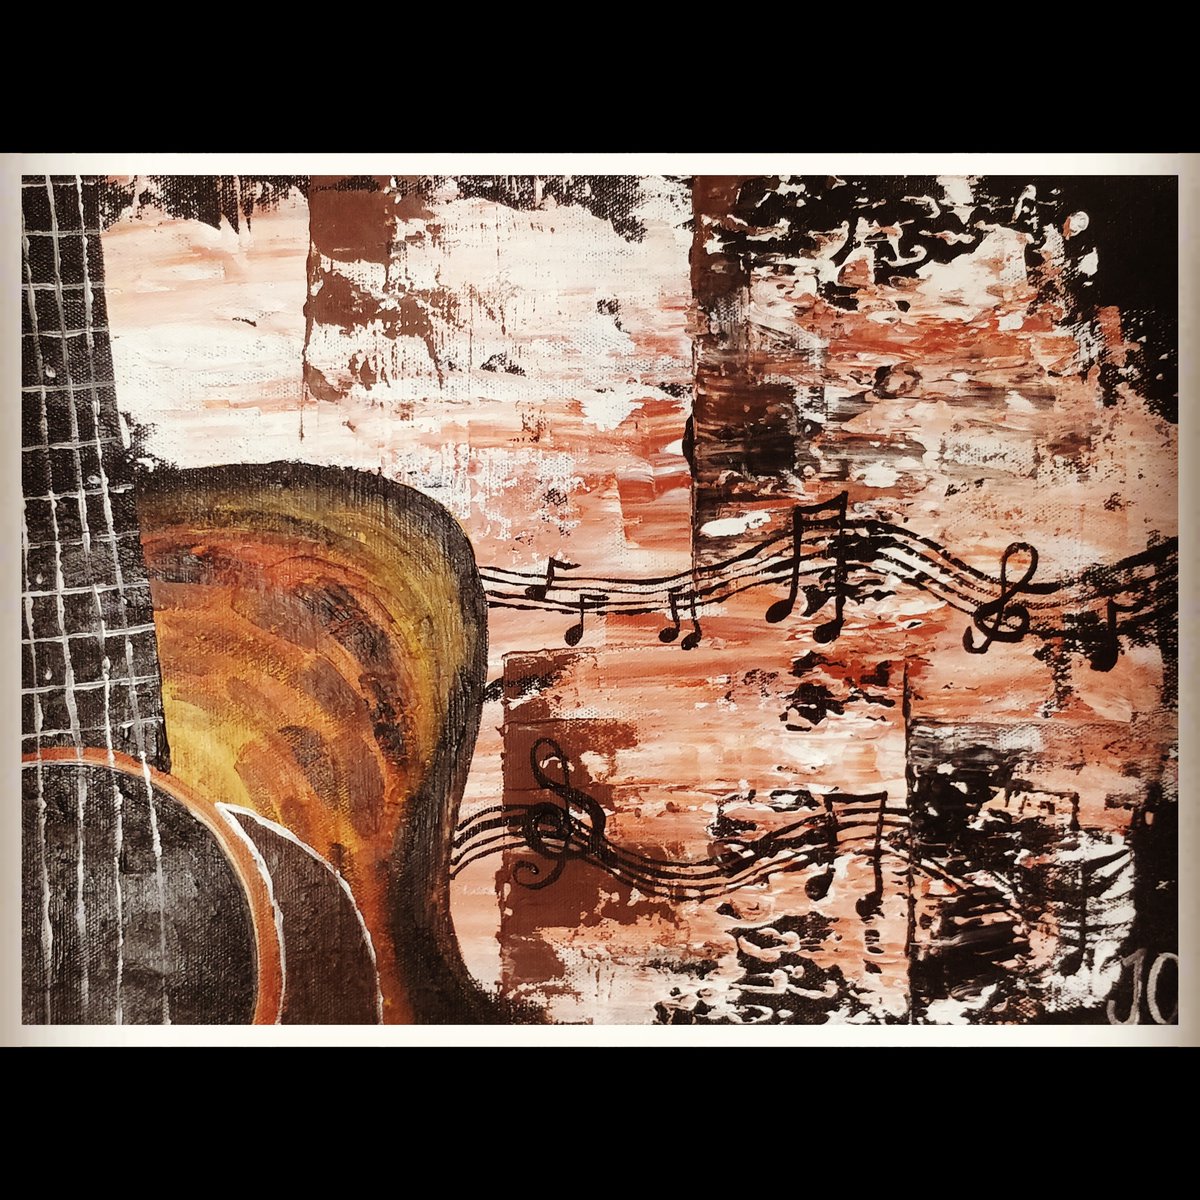 Commissioned work round 2

For the love of music #classicalguitar #waltz #musicalnotes #abstractart #acrylicpainting #artistsontwitter